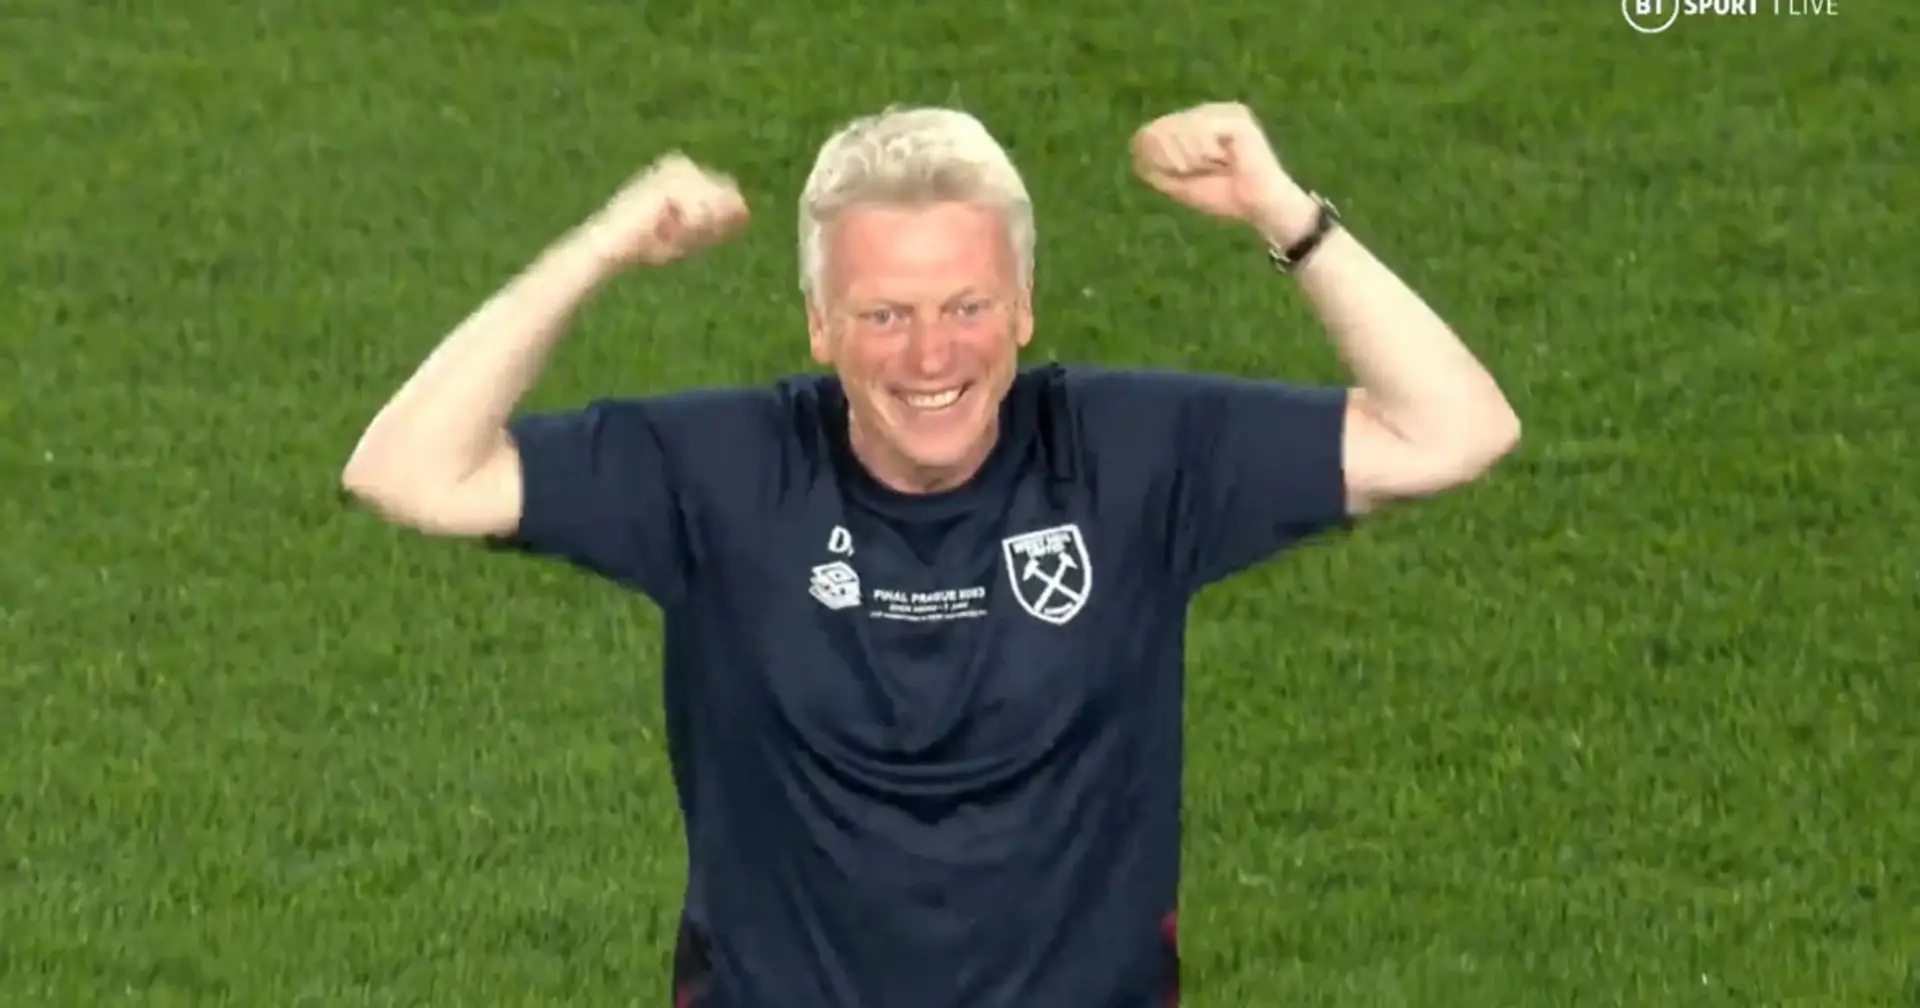 West Ham win UEFA Conference League — it's David Moyes' first piece of silverware